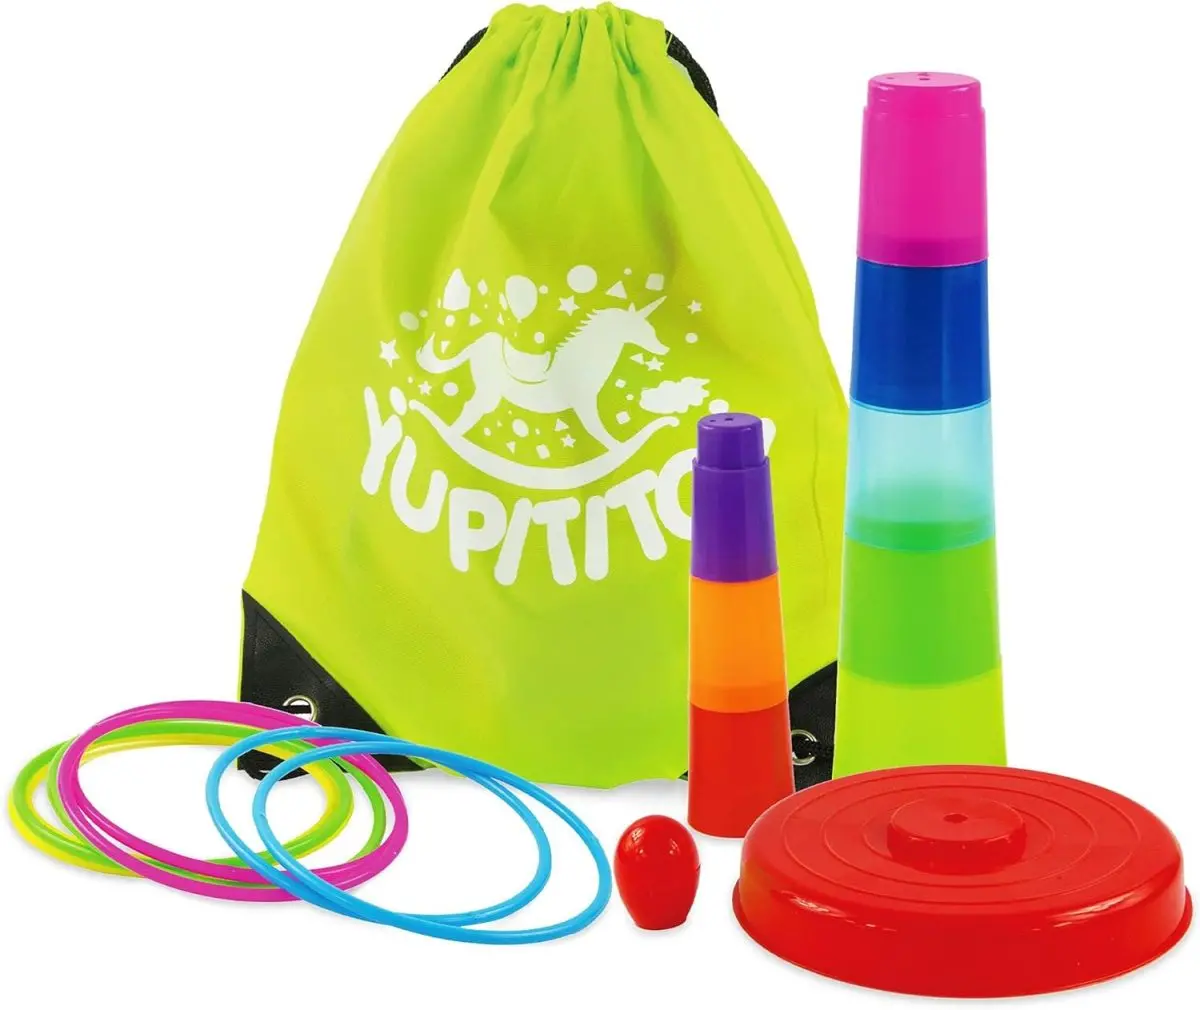 YUPITITOY Cone Ring Toss Game for Kids with 8 Throwing Rings and Travel Bag, Colorful Tossing and Active Play Set, Quick Setup for Indoor and Outdoor Use, Heavy-Duty Plastic